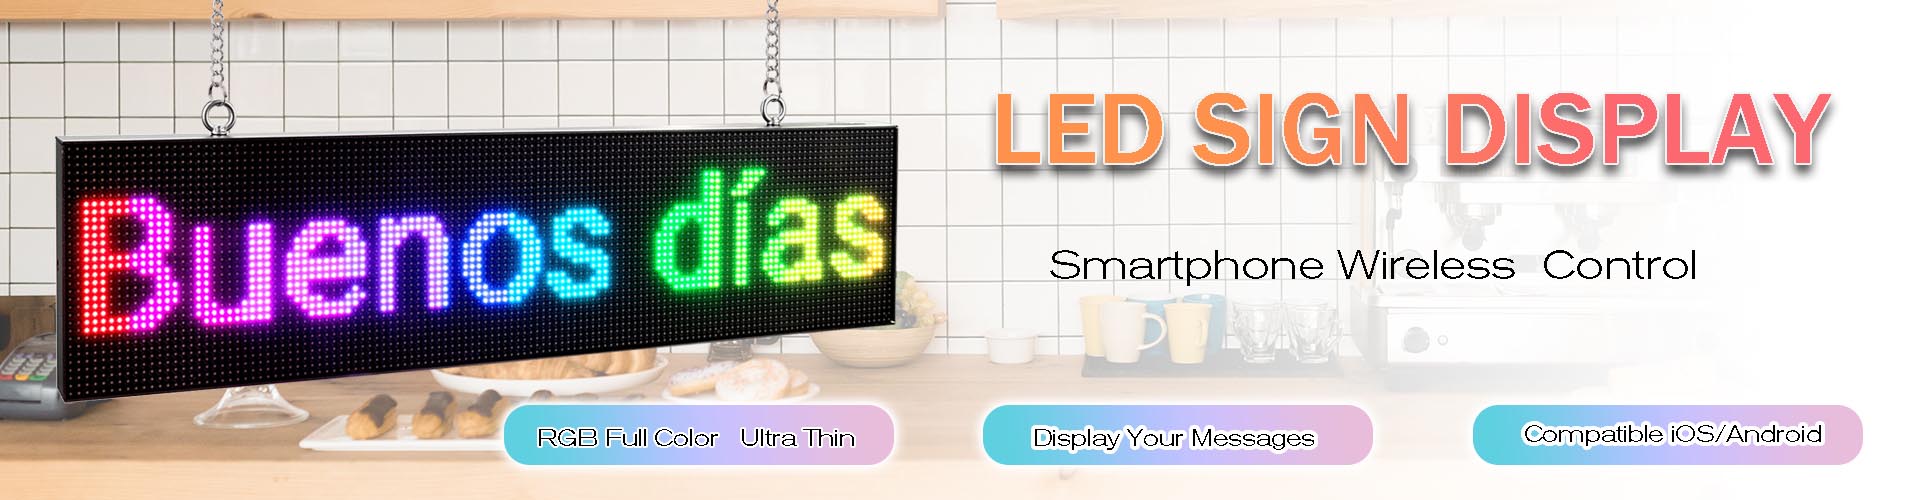 scrolling led sign board message display